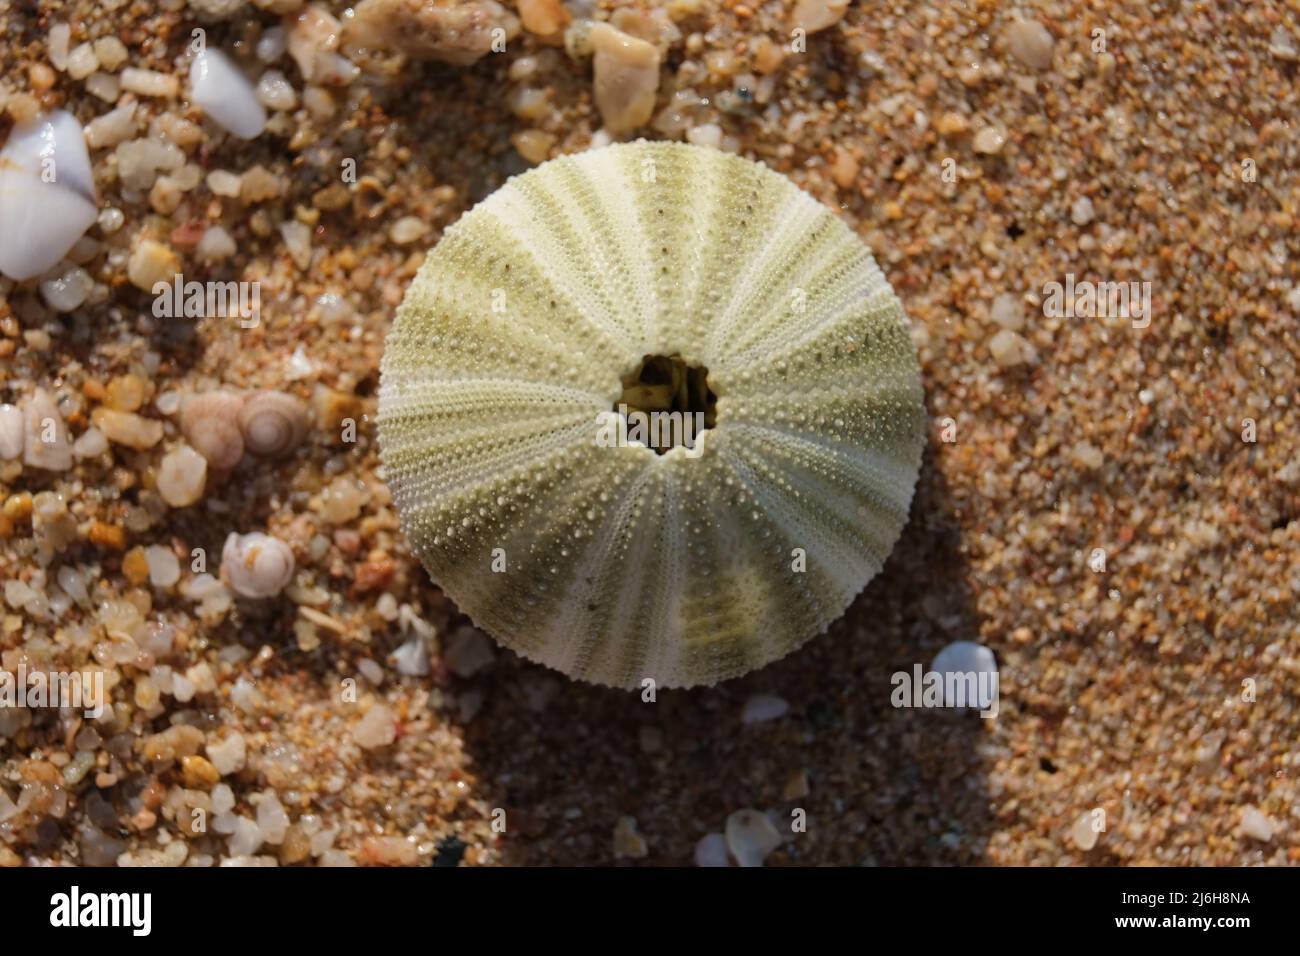 A perfectly round, intricately decorated shell of a little sea creature Stock Photo